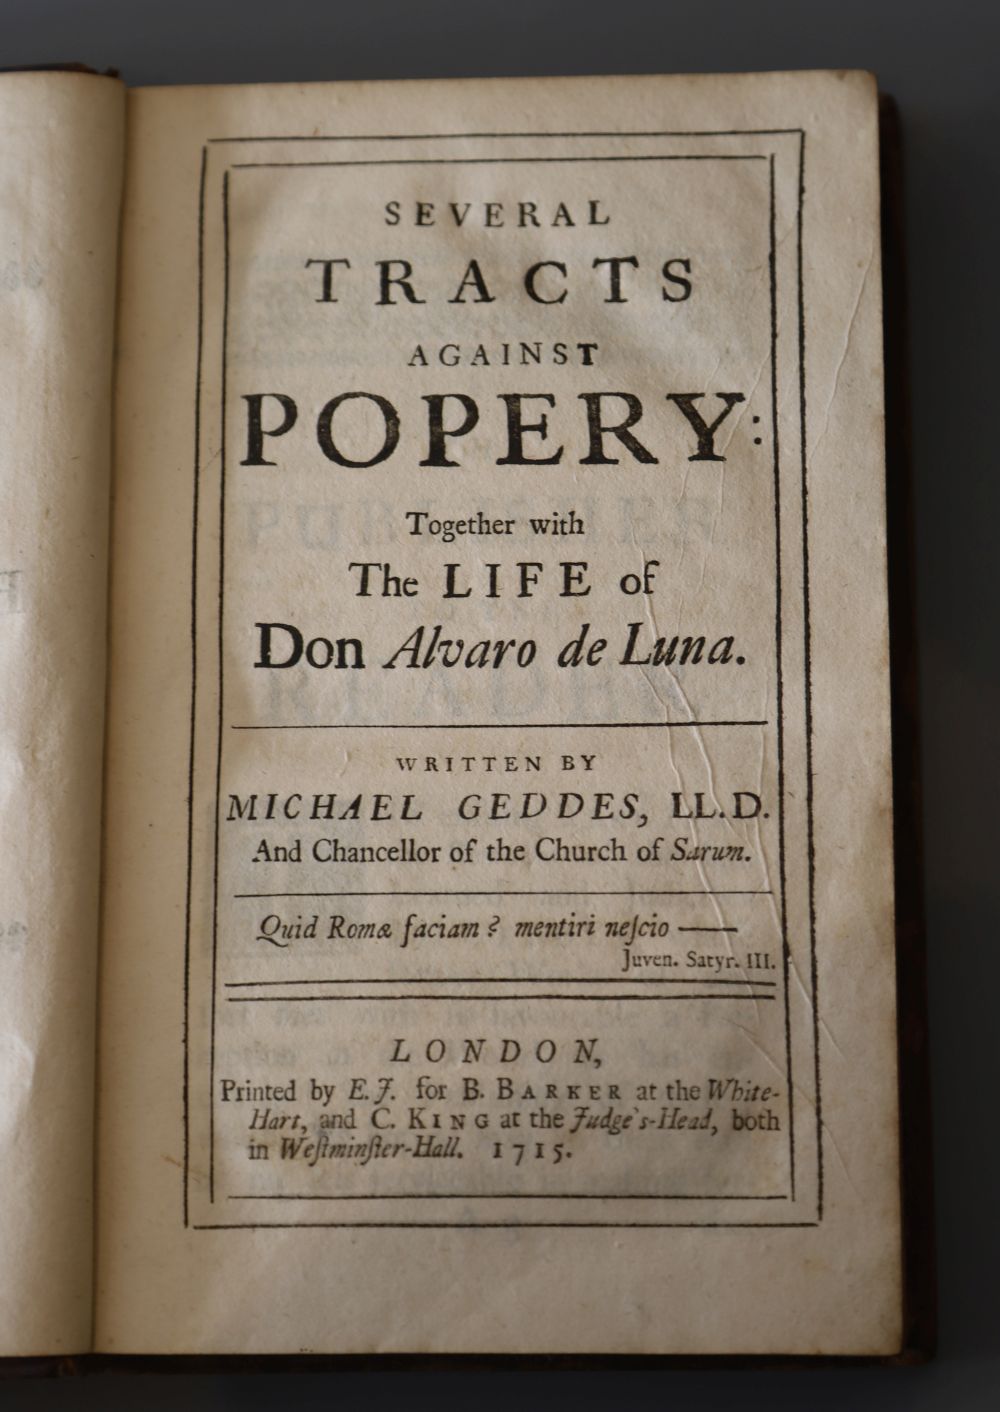 Geddes, Michael - Several tracts against Popery, calf, 8vo, E.J. for B. Barker, London, 1715